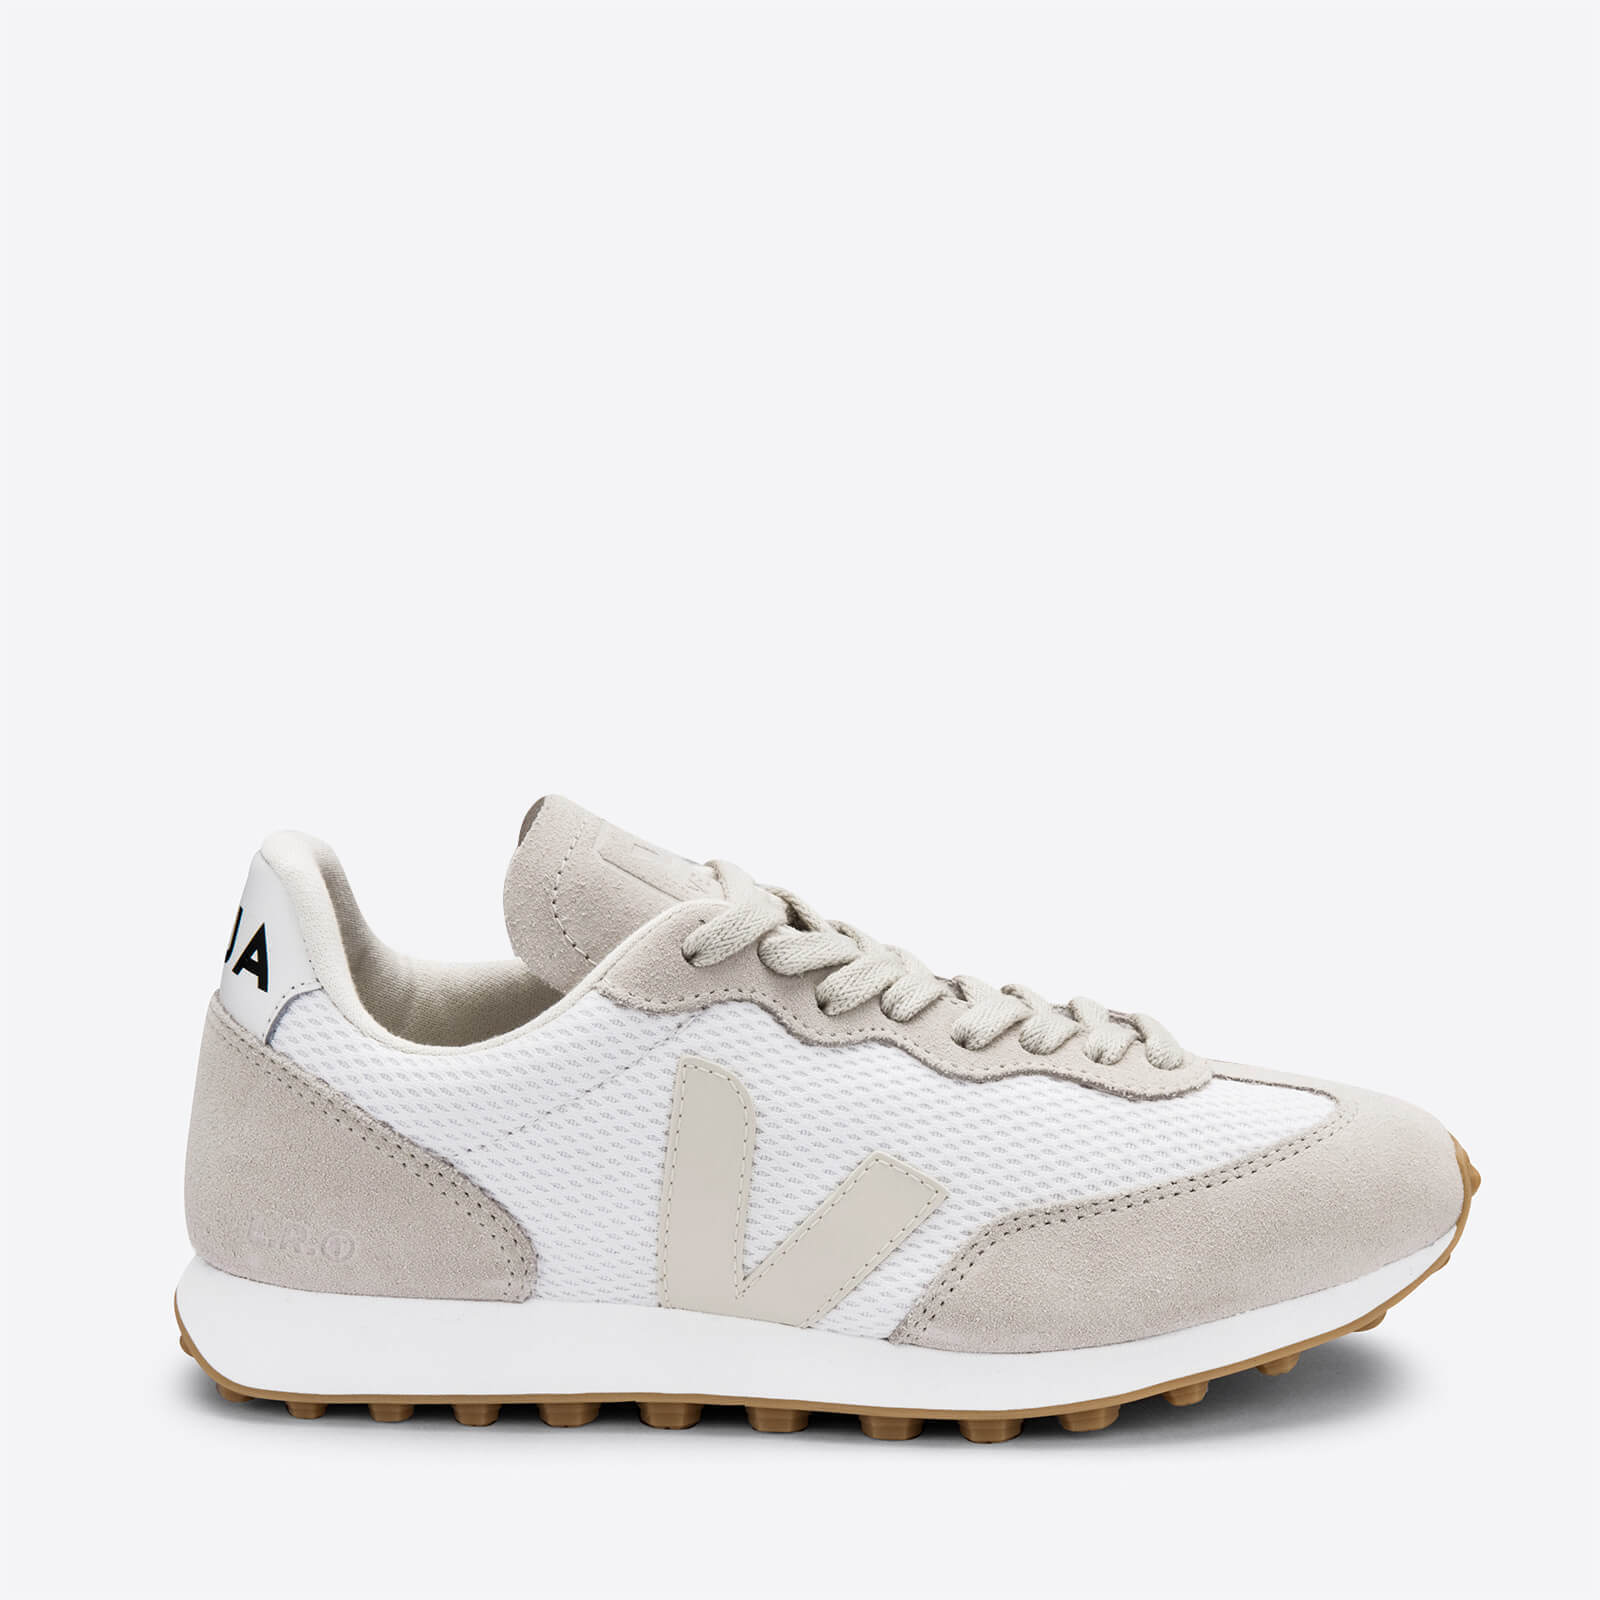 Veja Women’s Rio Branco Running Style Trainers - White/Pierre/Natural